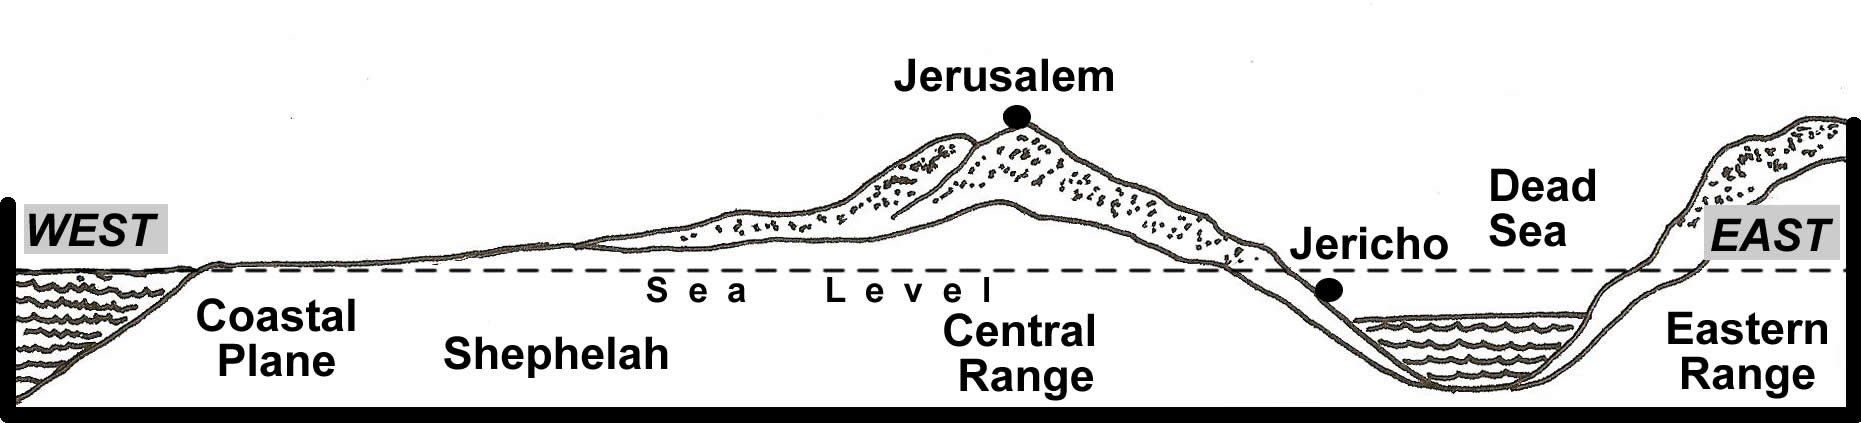 Topographical Cross-Section of Israel North to South